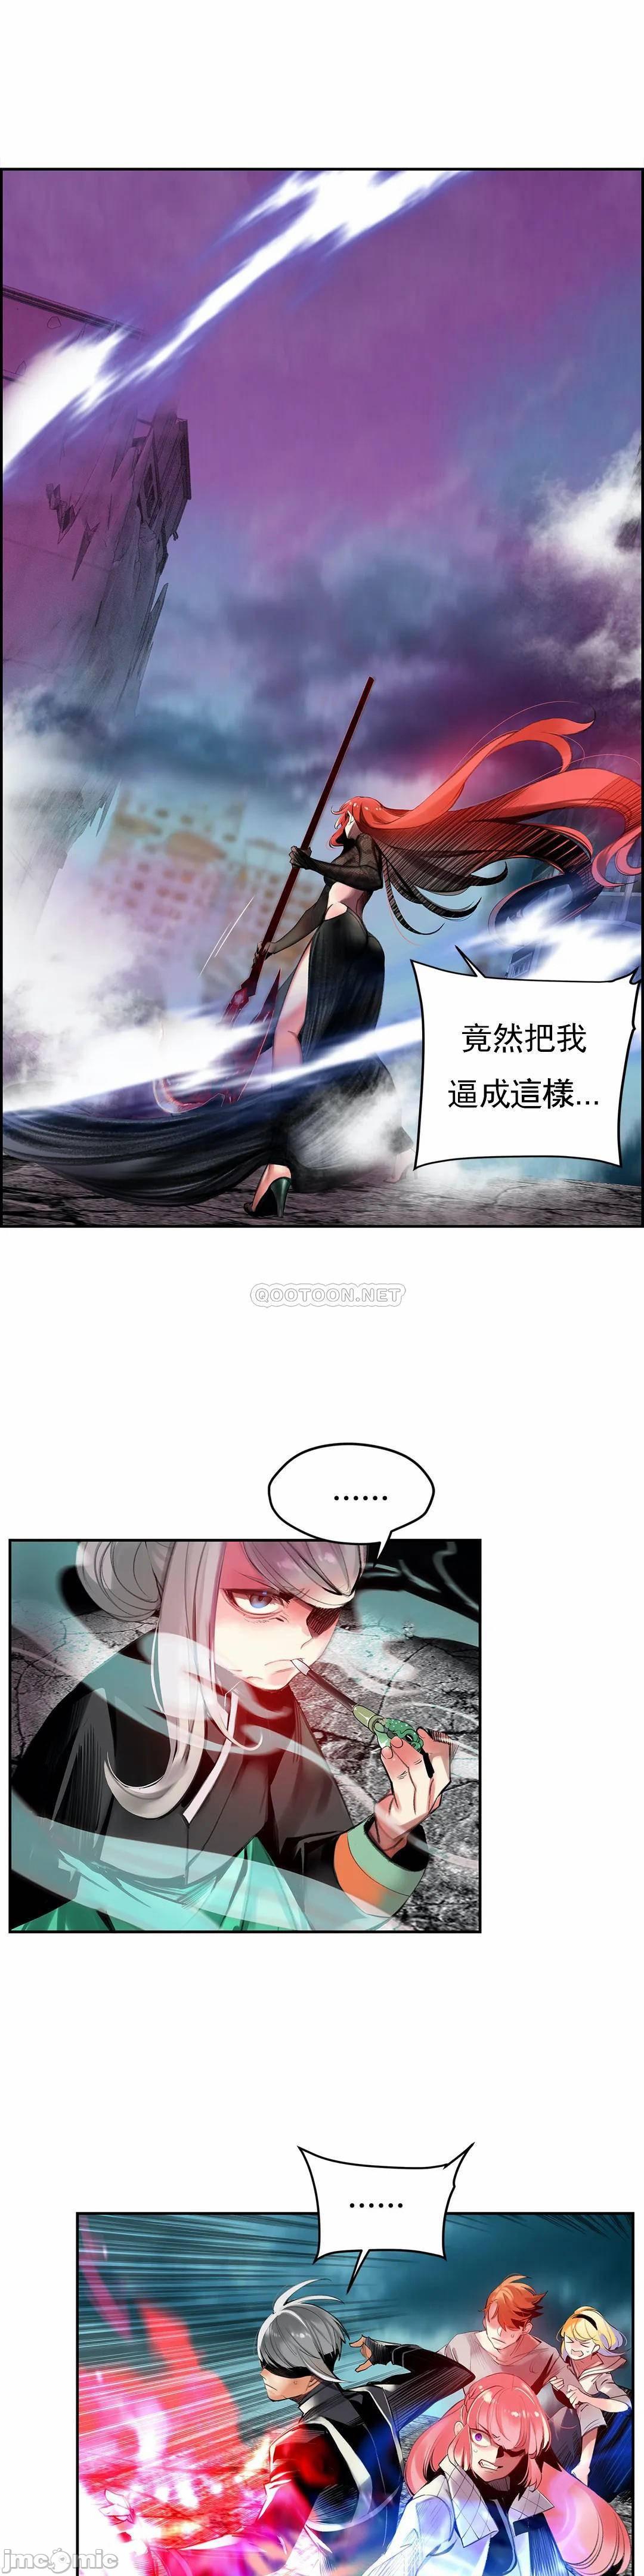 [Juder] Lilith`s Cord (第二季) Ch.77-93 end [Chinese] 325